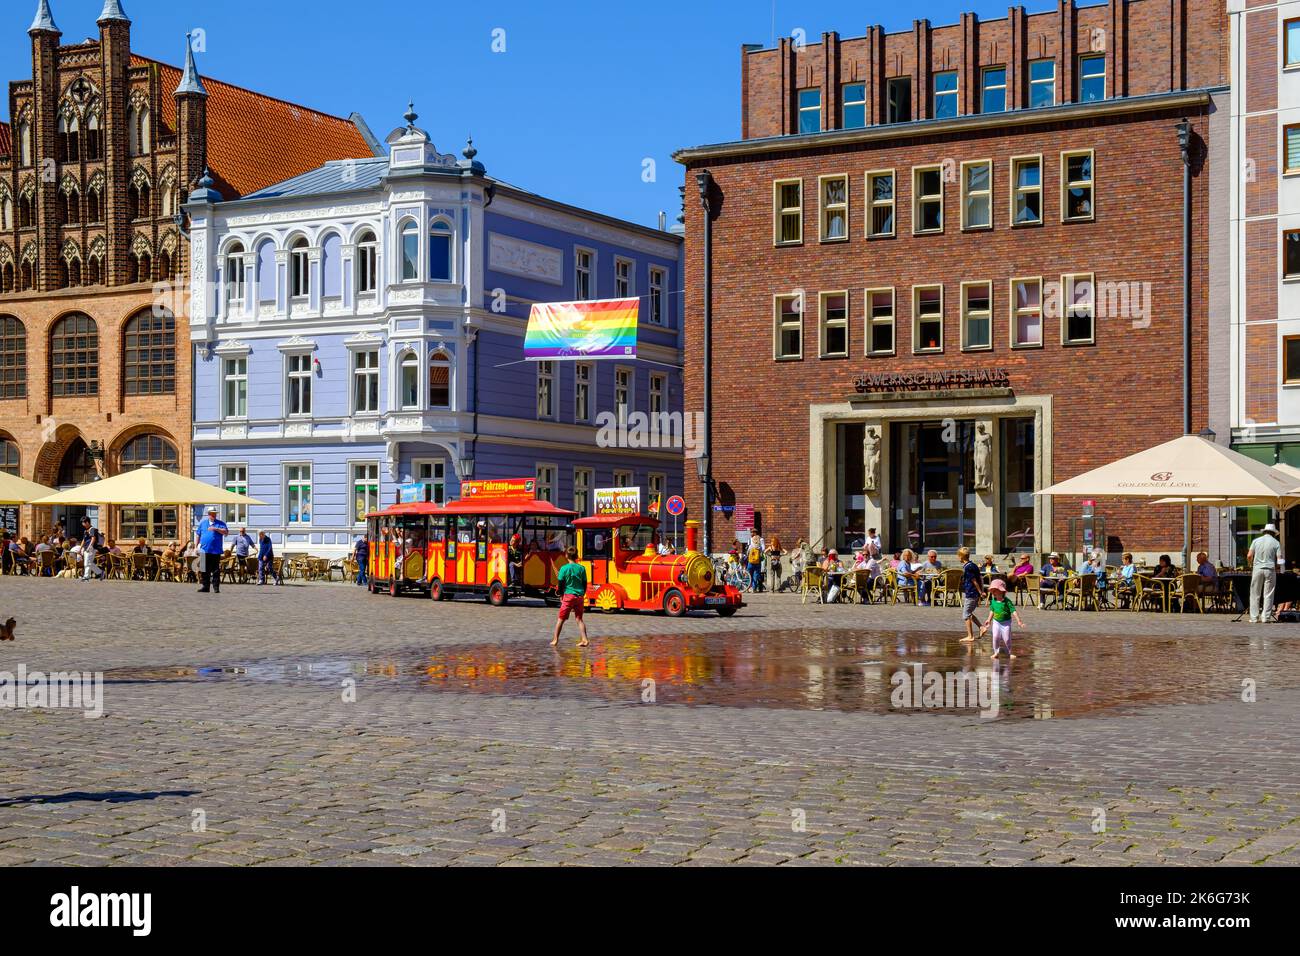 Summer tourist scene typical for the vacation season on the Old Market Square, Hanseatic Town of Stralsund, Mecklenburg-Western Pomerania, Germany. Stock Photo